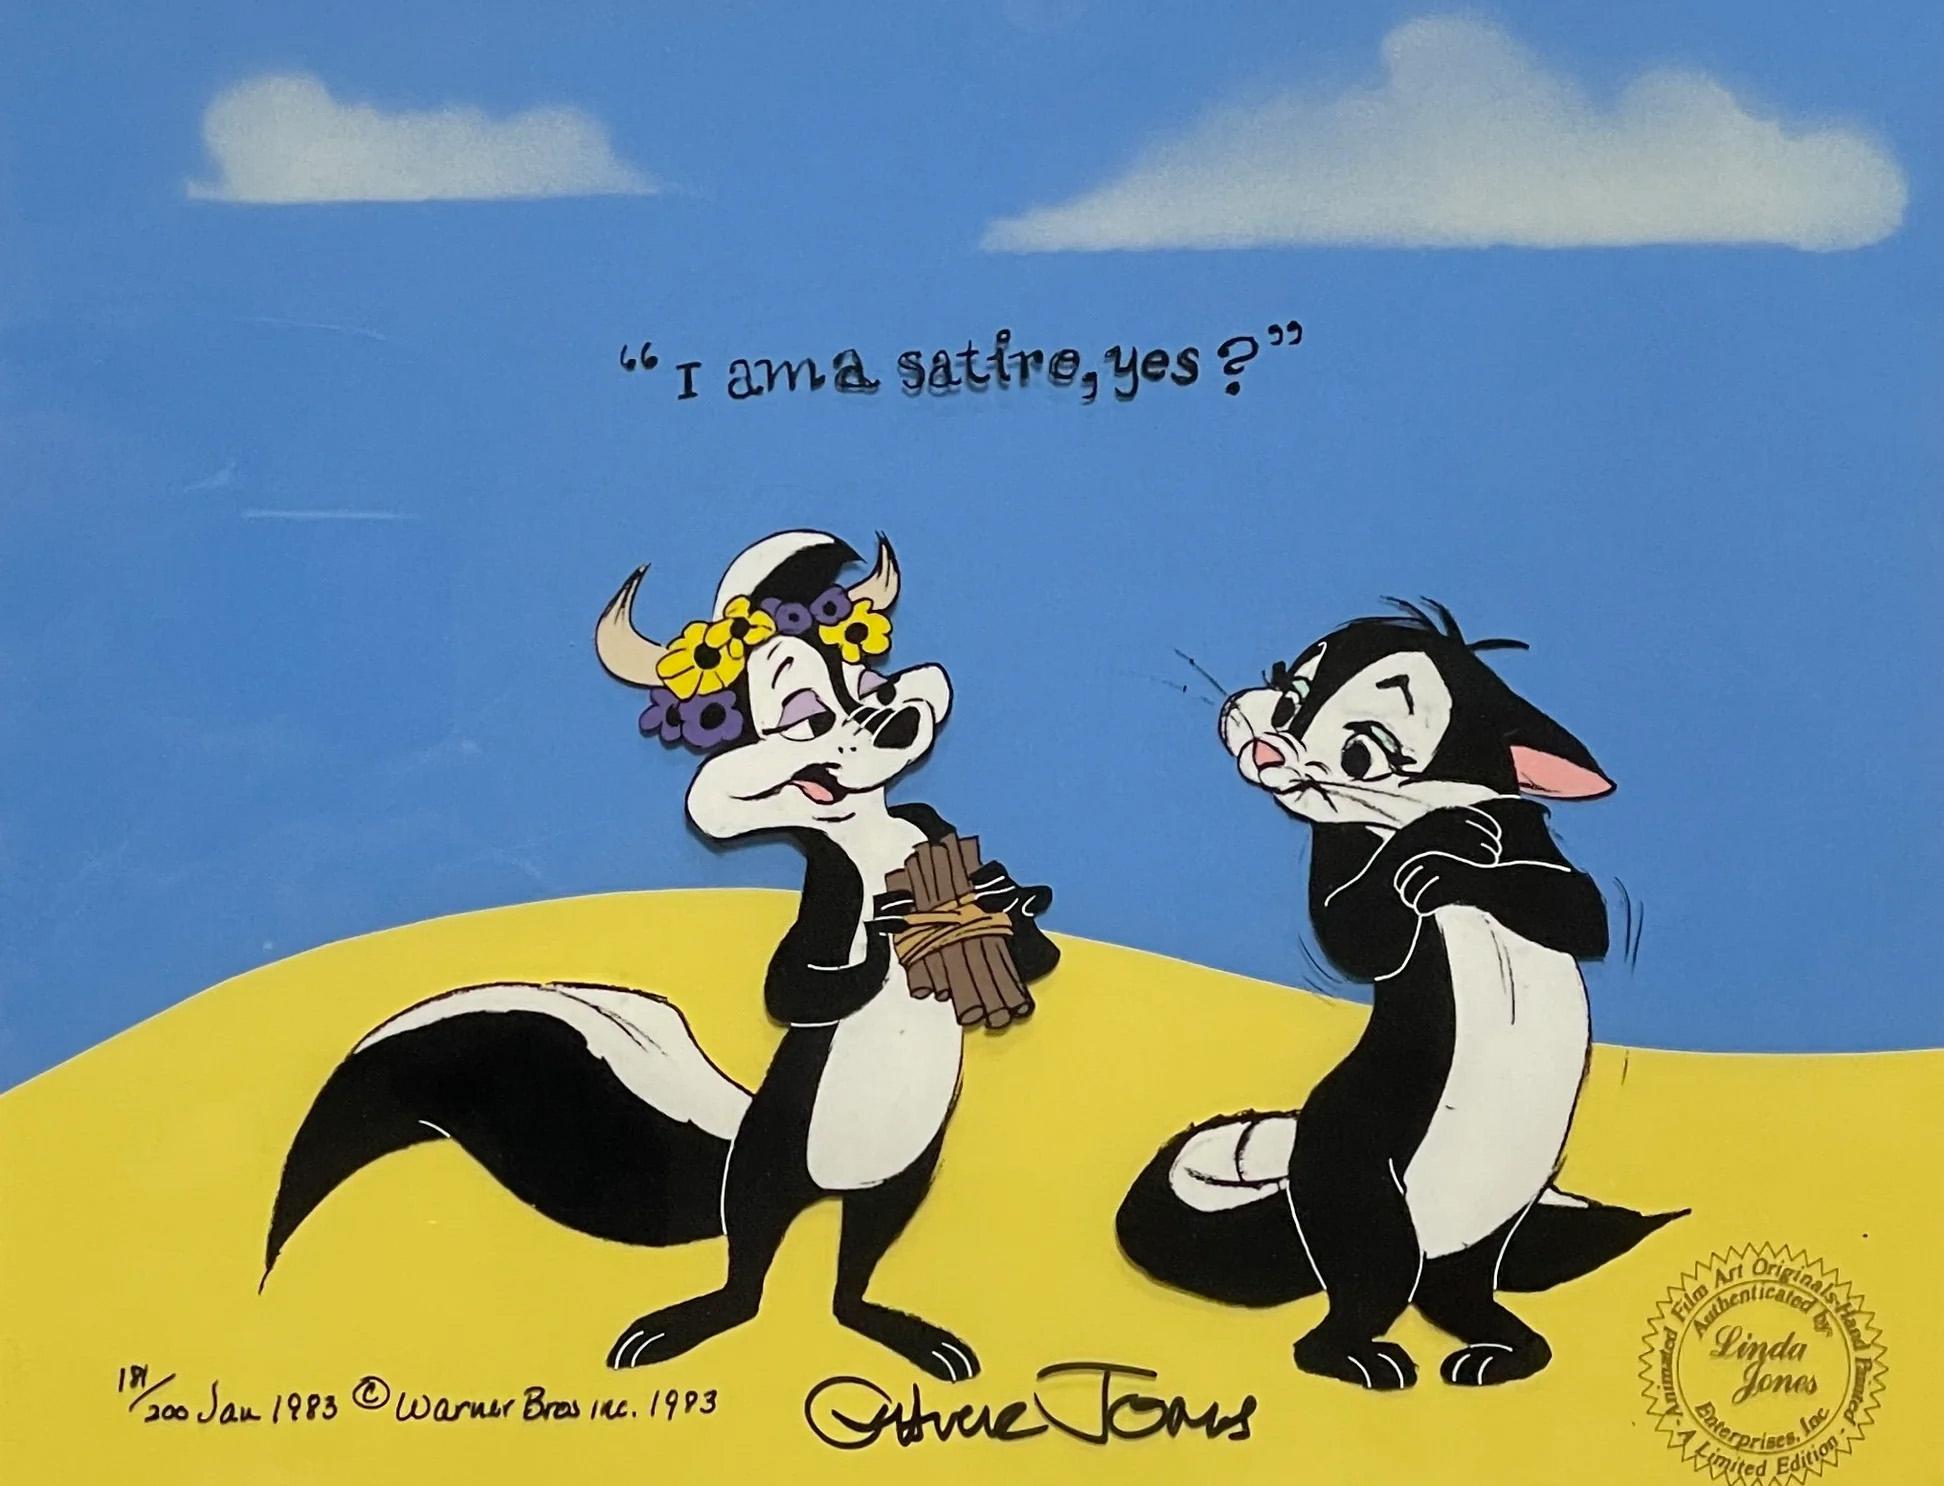 MEDIUM: Limited Edition Cel
IMAGE SIZE: 12 Field
EDITION SIZE: 200
SKU: CCV2723

ABOUT THE IMAGE: This cel is hand-signed by Chuck Jones and is numbered 181/200.